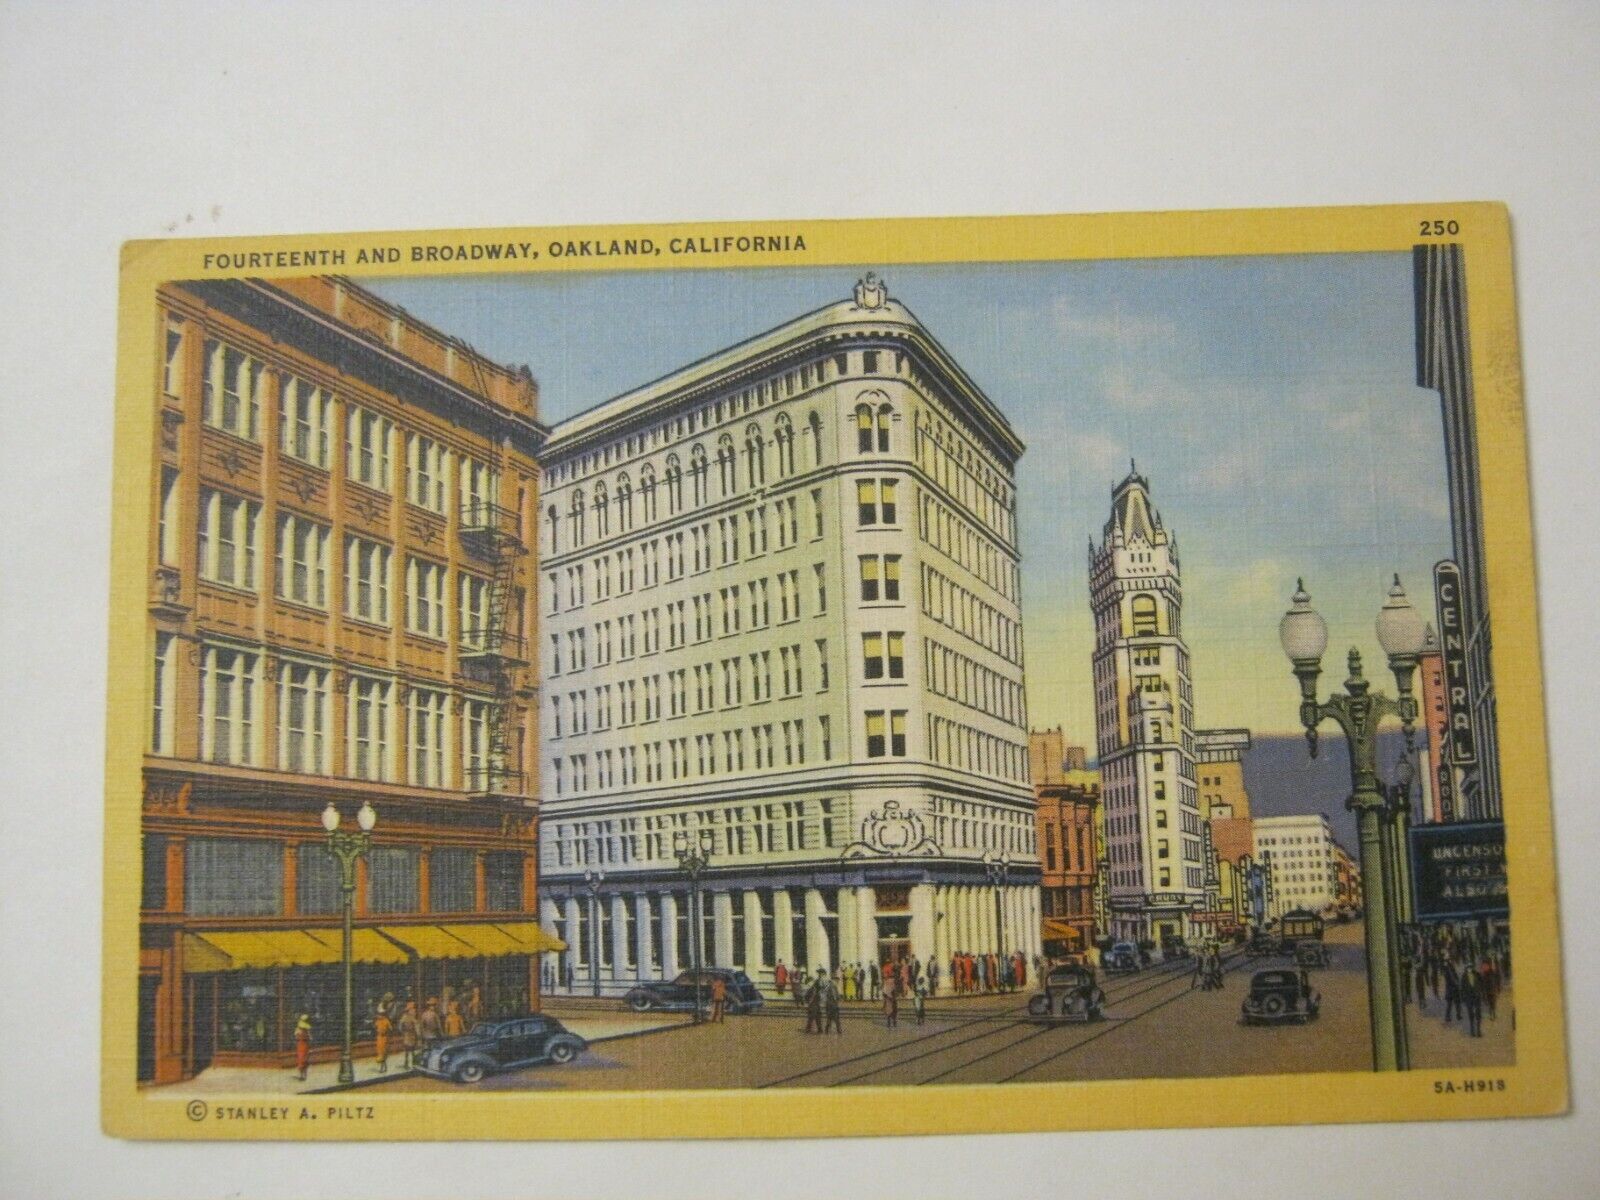 Fourteenth And Broadway, Oakland, California, Post Card, #250 (024-2)